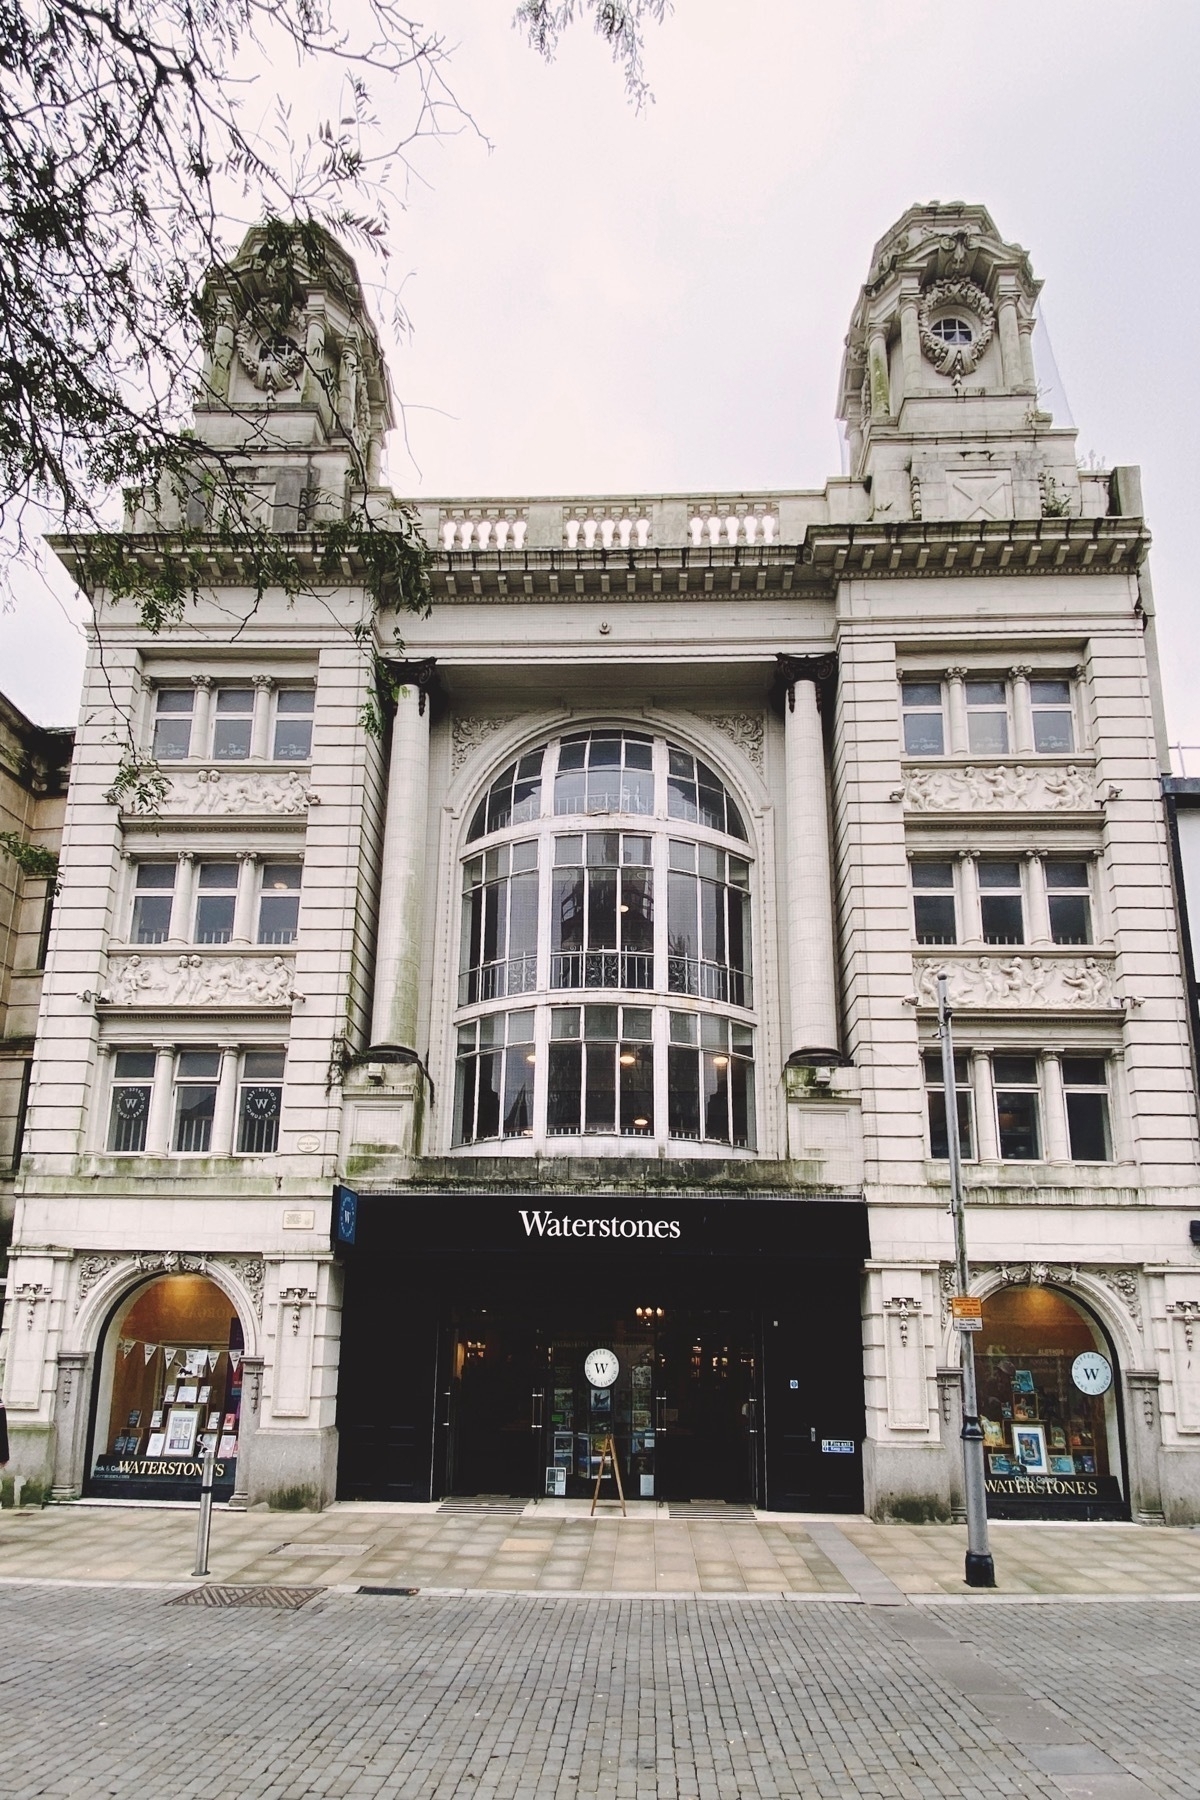 White stone, ornate historical building with central large curved glass window on upper floors.Modern bookshop entrance at ground level.